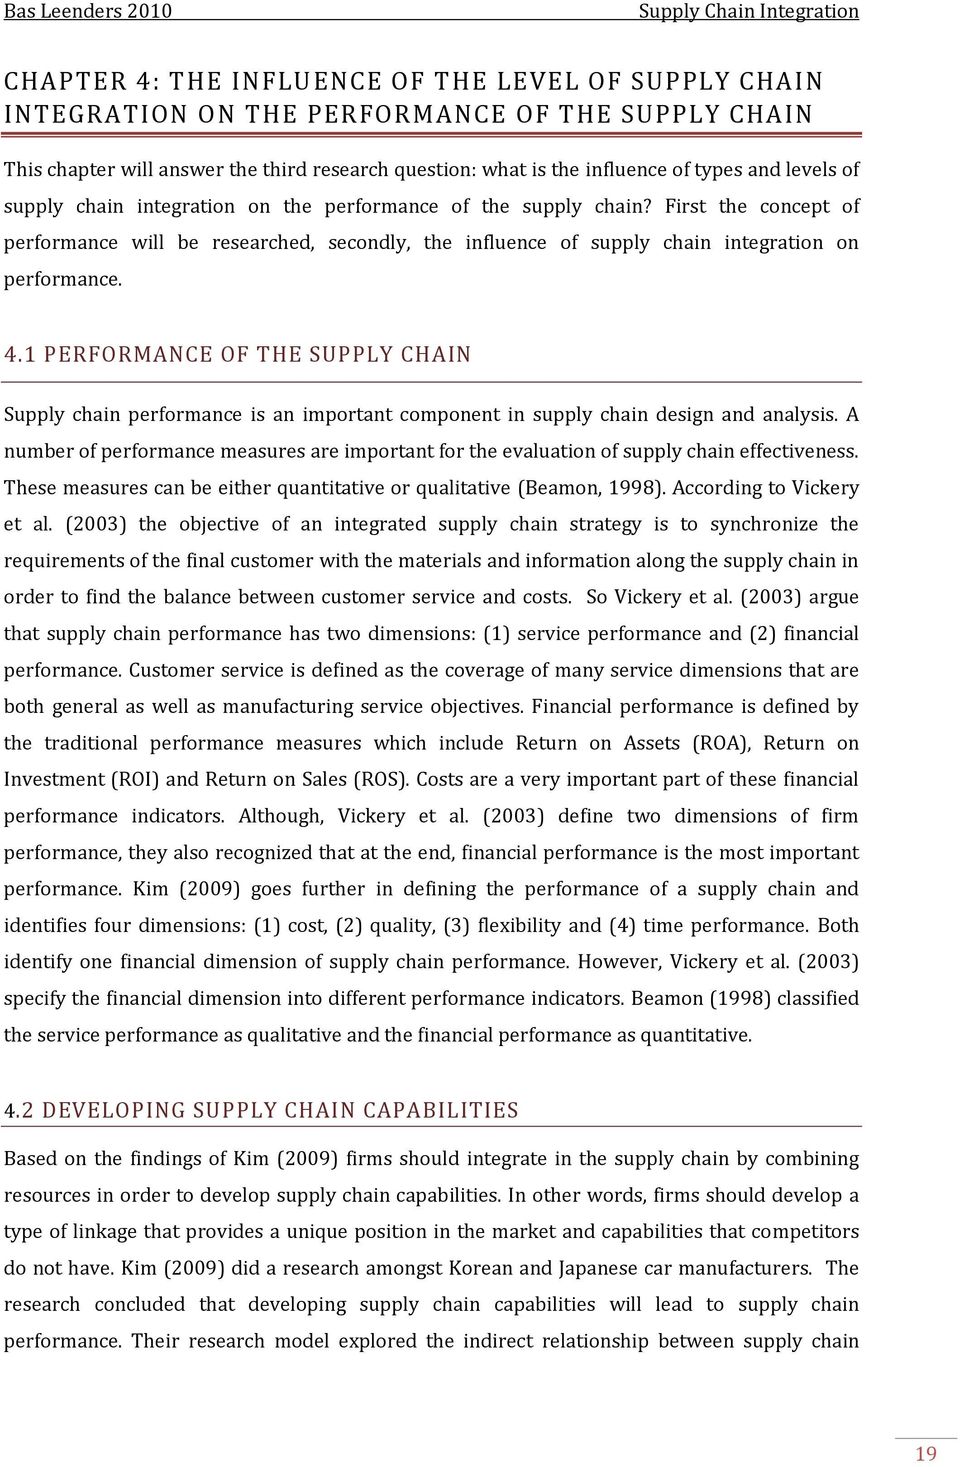 1 PERFORMANCE OF THE SUPPLY CHAIN Supply chain performance is an important component in supply chain design and analysis.